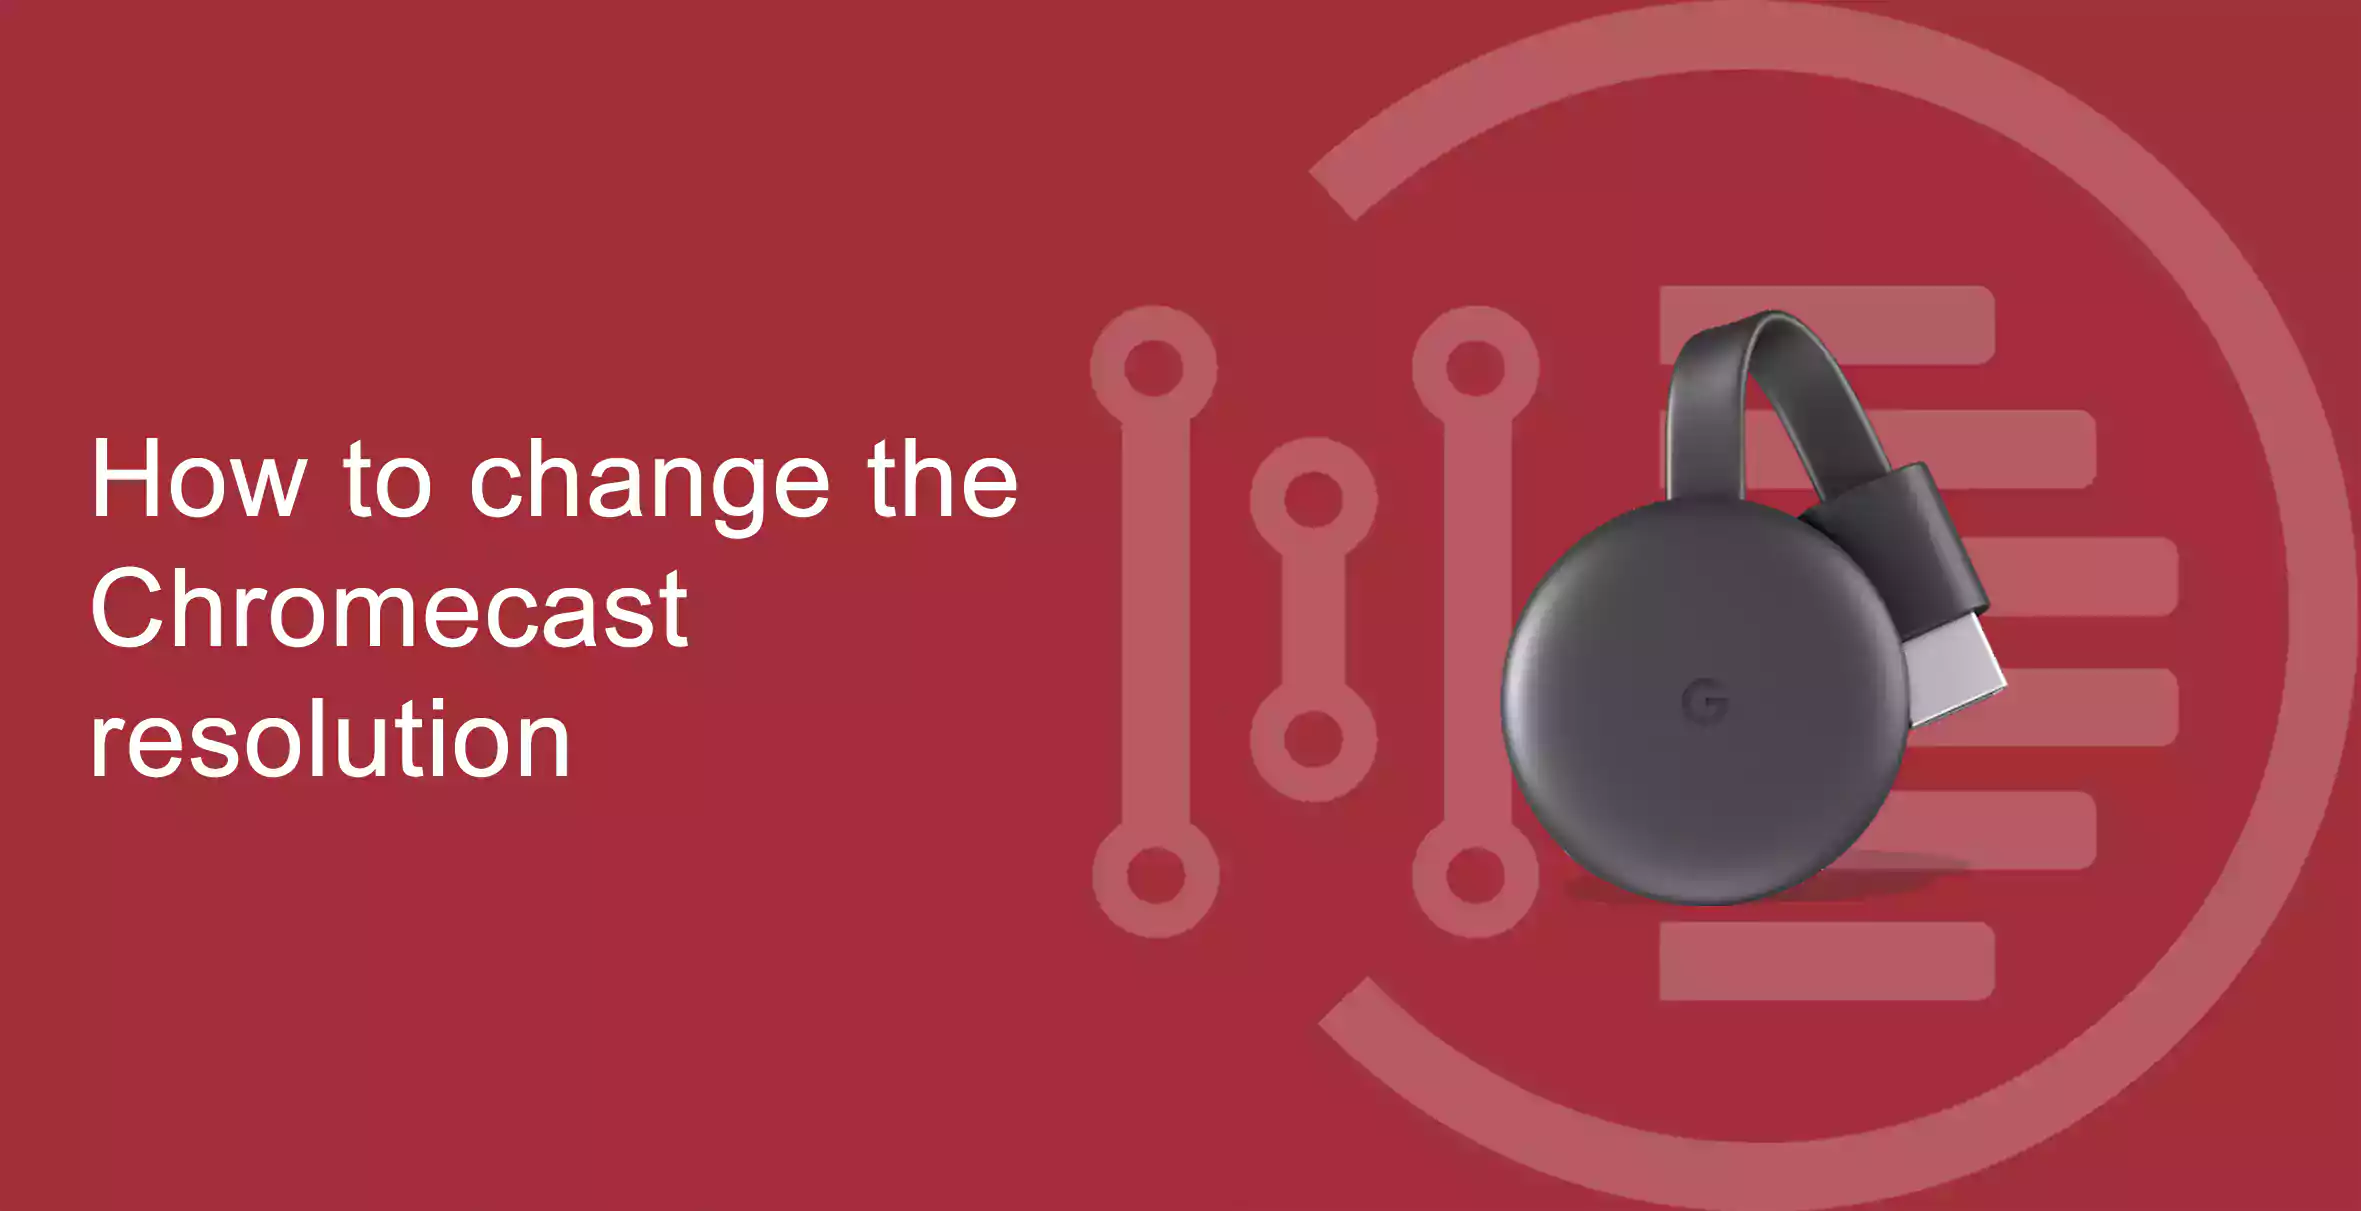 How to change the Chromecast resolution